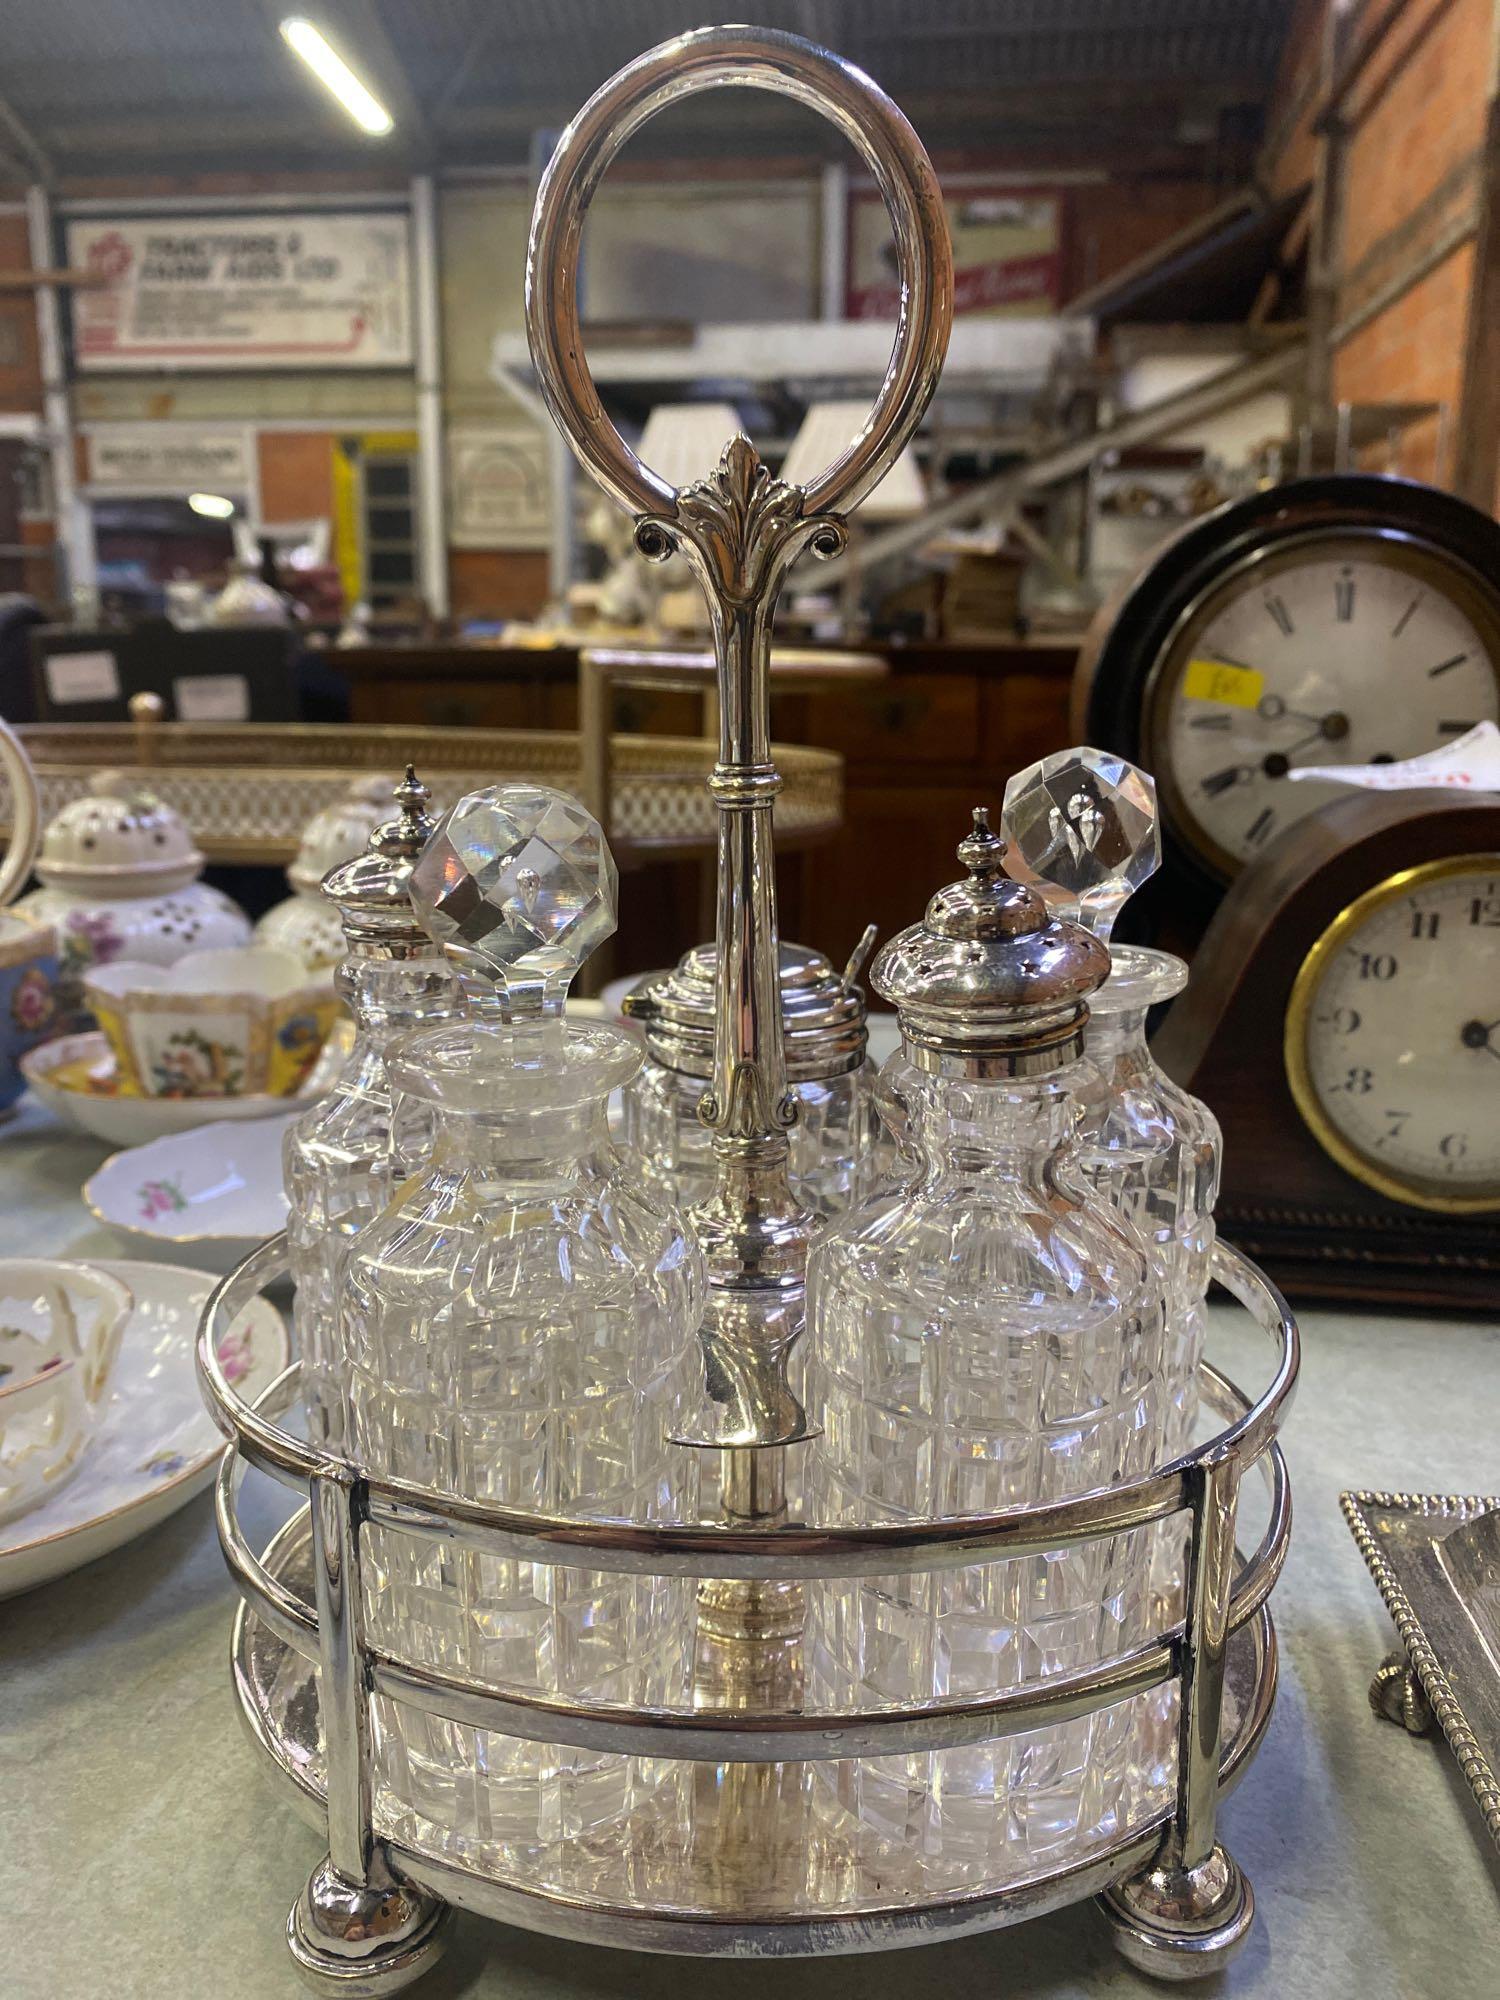 Three silverplate cruets and a silverplate egg stand - Image 3 of 6